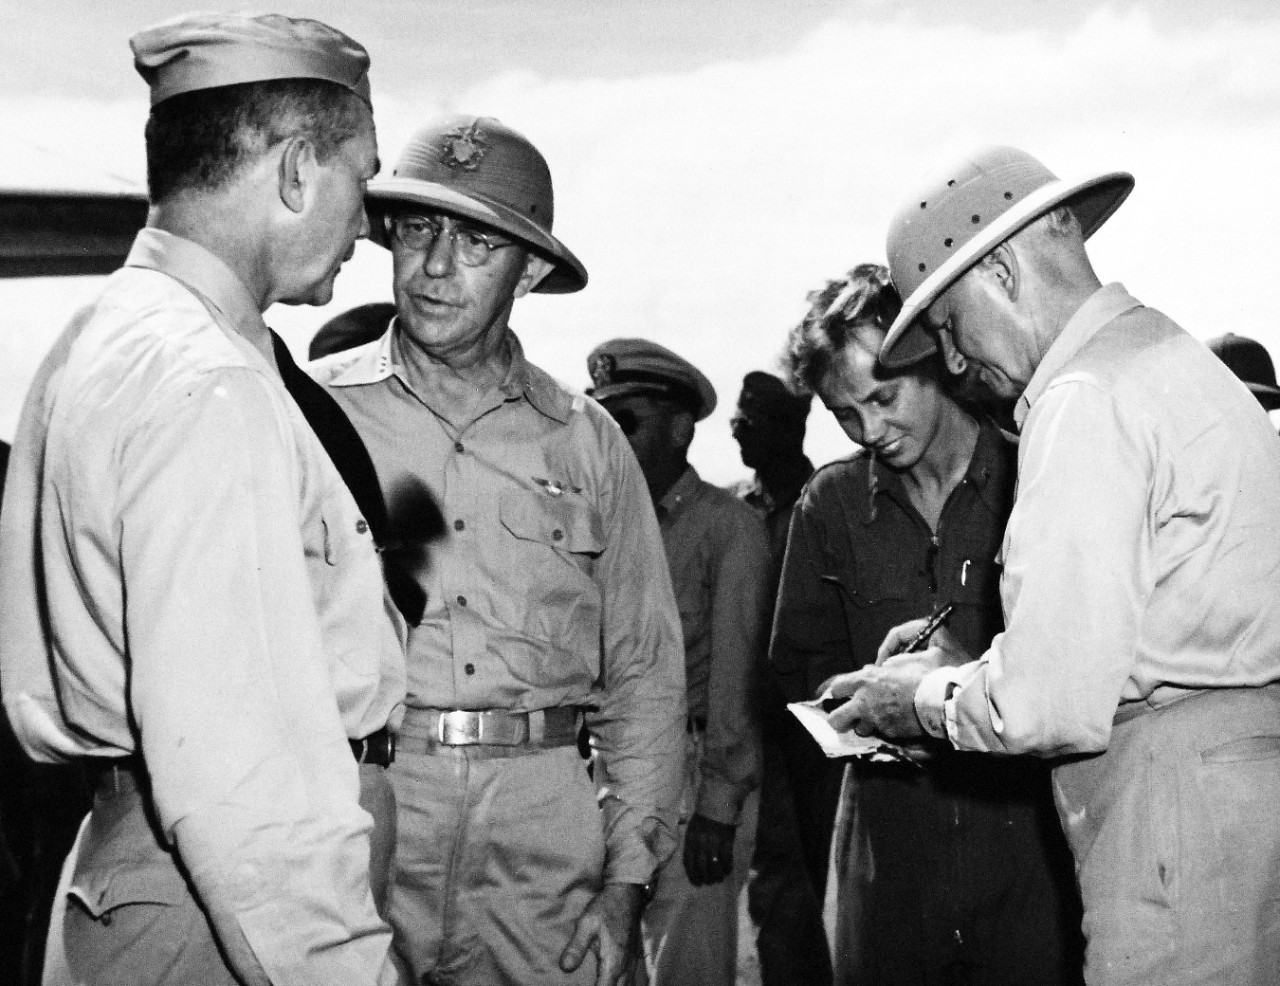 208-PU-70A-5:   Battle for Iwo Jima, February 1945.   Secretary Forrestal Confers with Admiral Nimitz and Vice Admiral Turner.   Secretary of the Navy James Forrestal talks with Vice Admiral Richmond K. Turner, USN, Commander of the Iwo Jima expeditionary force, at the airport at Saipan, just after the Secretary’s arrival by plane from Washington, D.C.   At the right, Second Lieutenant James F. Perlowin gets an autograph from Fleet Admiral Chester W. Nimitz, USN, Commander-in-Chief, Pacific Fleet and Pacific Ocean Areas.  Secretary Forrestal watched the invasion of Iwo Jima from Vice Admiral Turner’s Flagship and went ashore on the volcanic island to view at first hand the fiery battle between Marines and Japanese for control of that important stepping stone to Tokyo.   Photograph released February 25, 1945.   Office of War Information Photograph, now in the collections of the National Archives.  (2016/03/29).